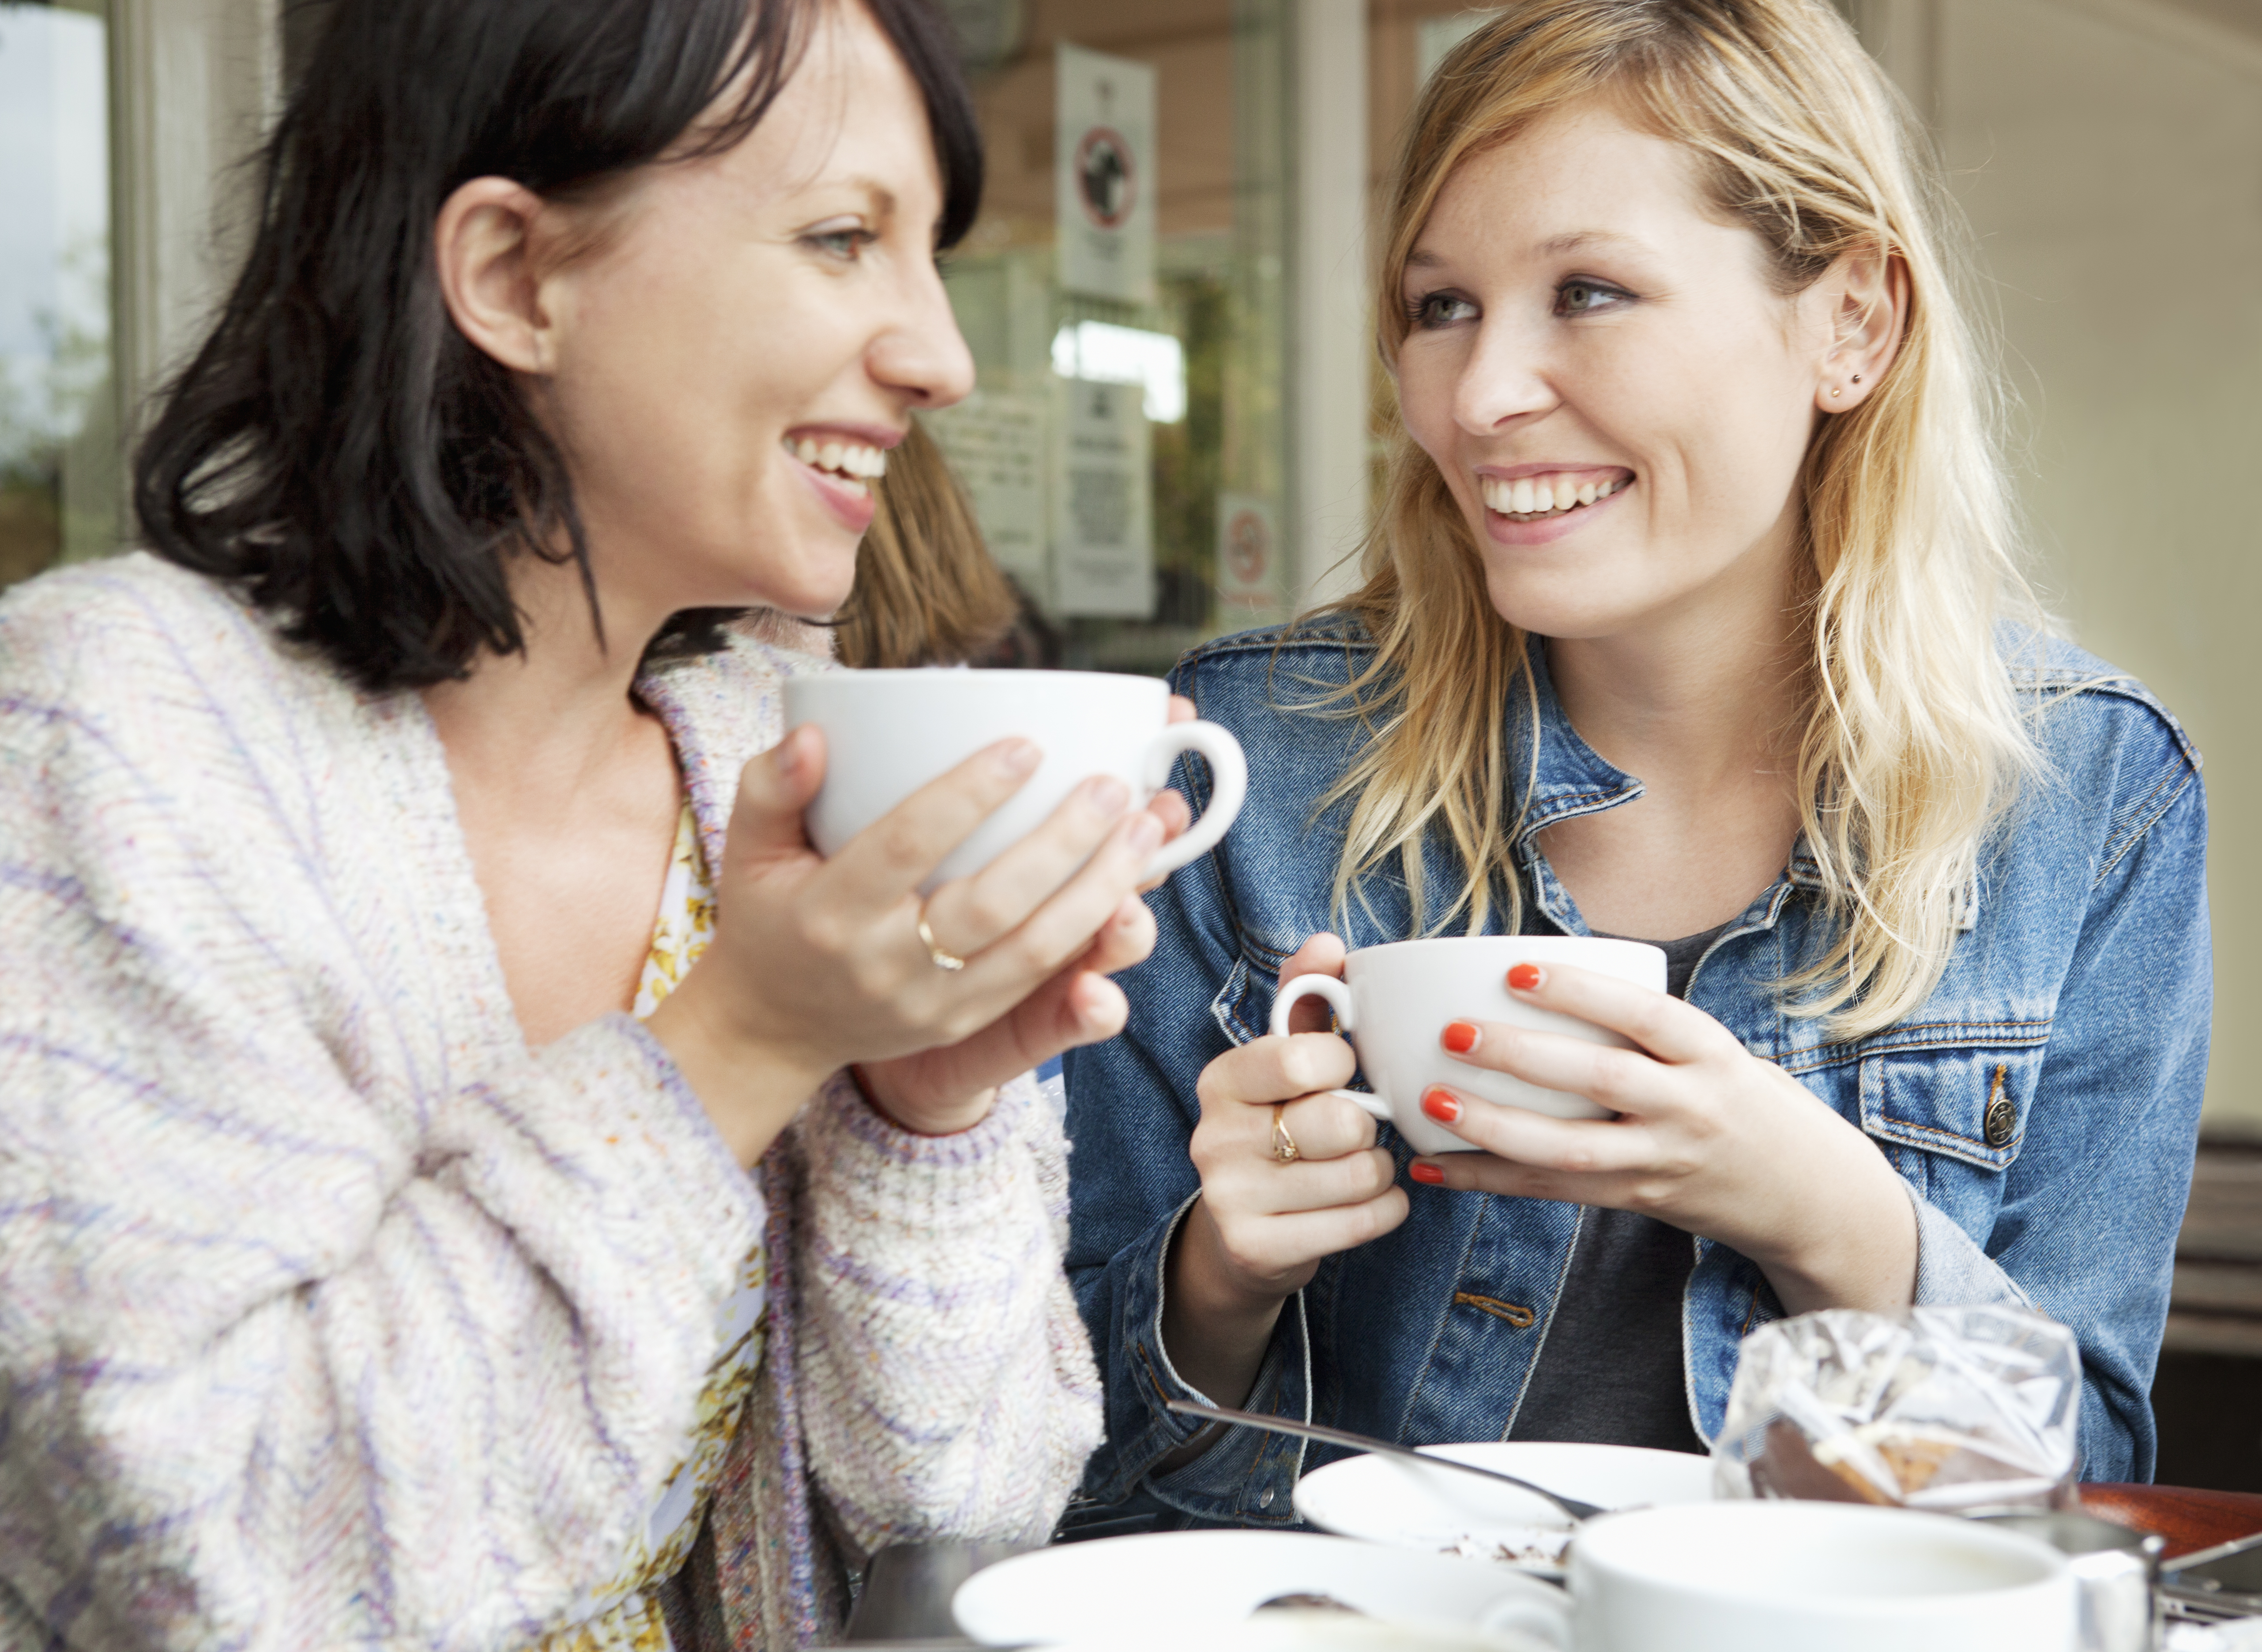 Two women bonding over coffee | Source: Getty Images